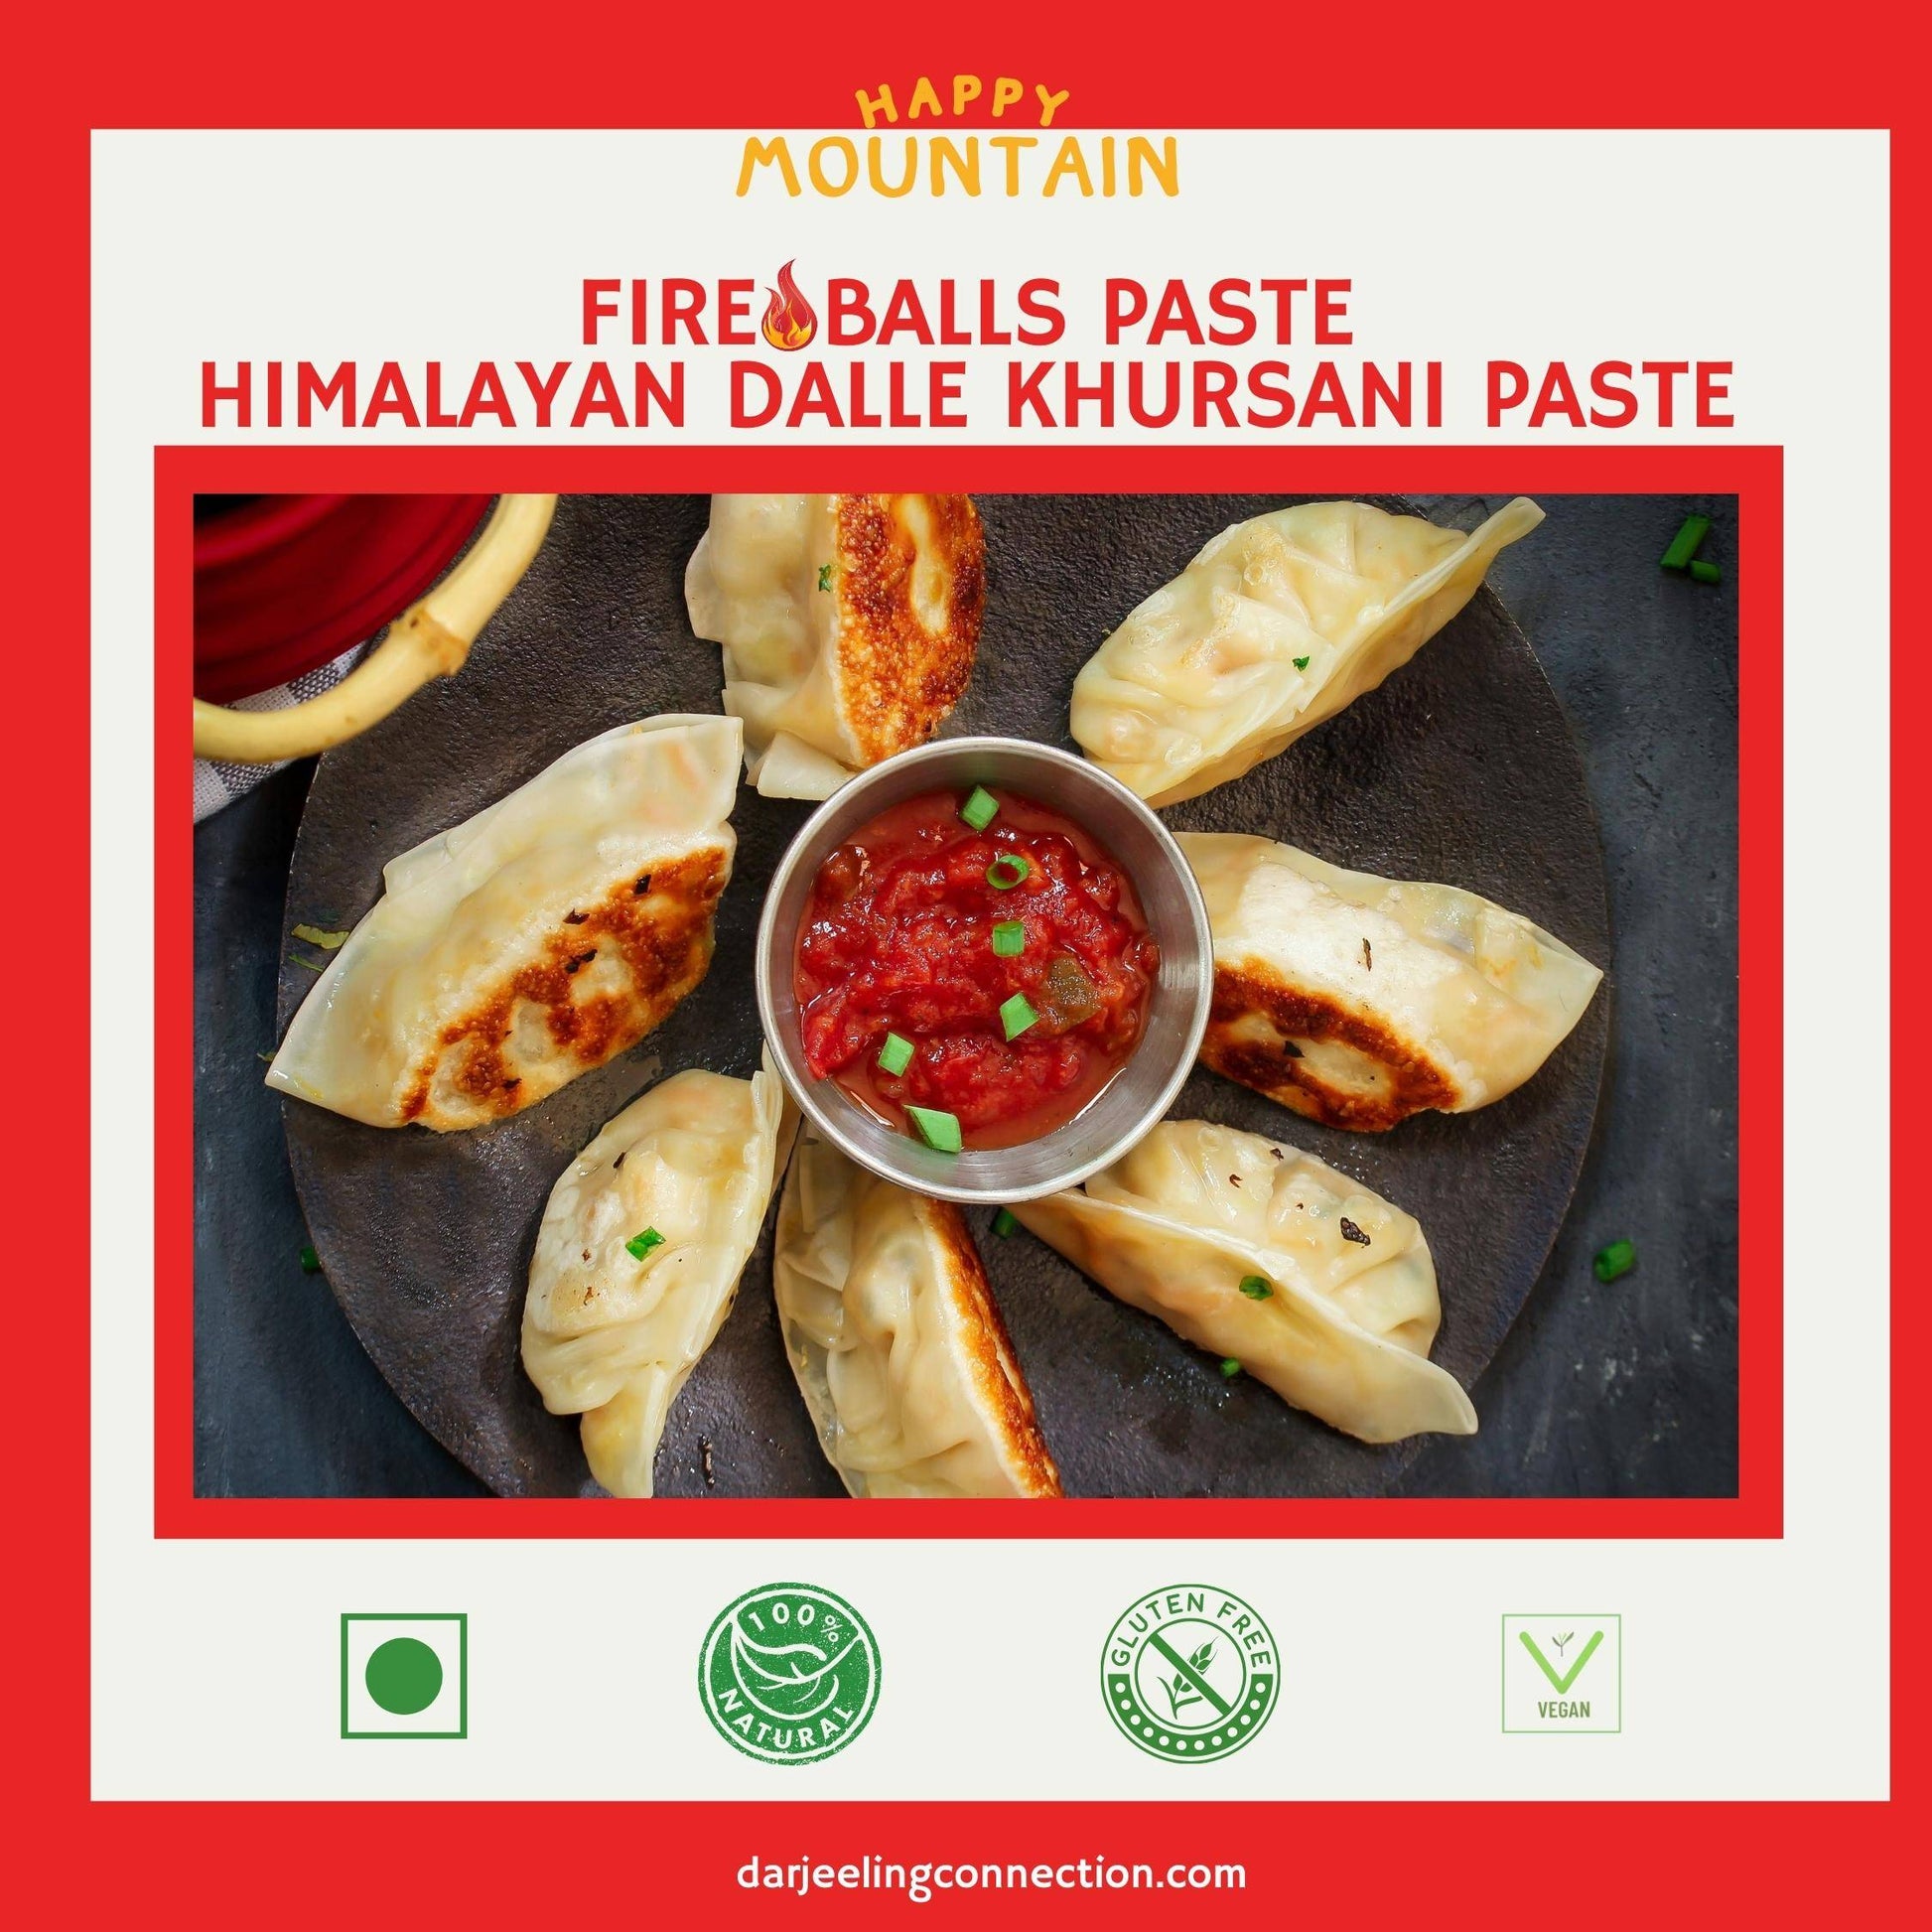 Enjoy our Fireballs Cherry Chilli Peppers (Dalle) Paste with Your Food- Happy Mountain